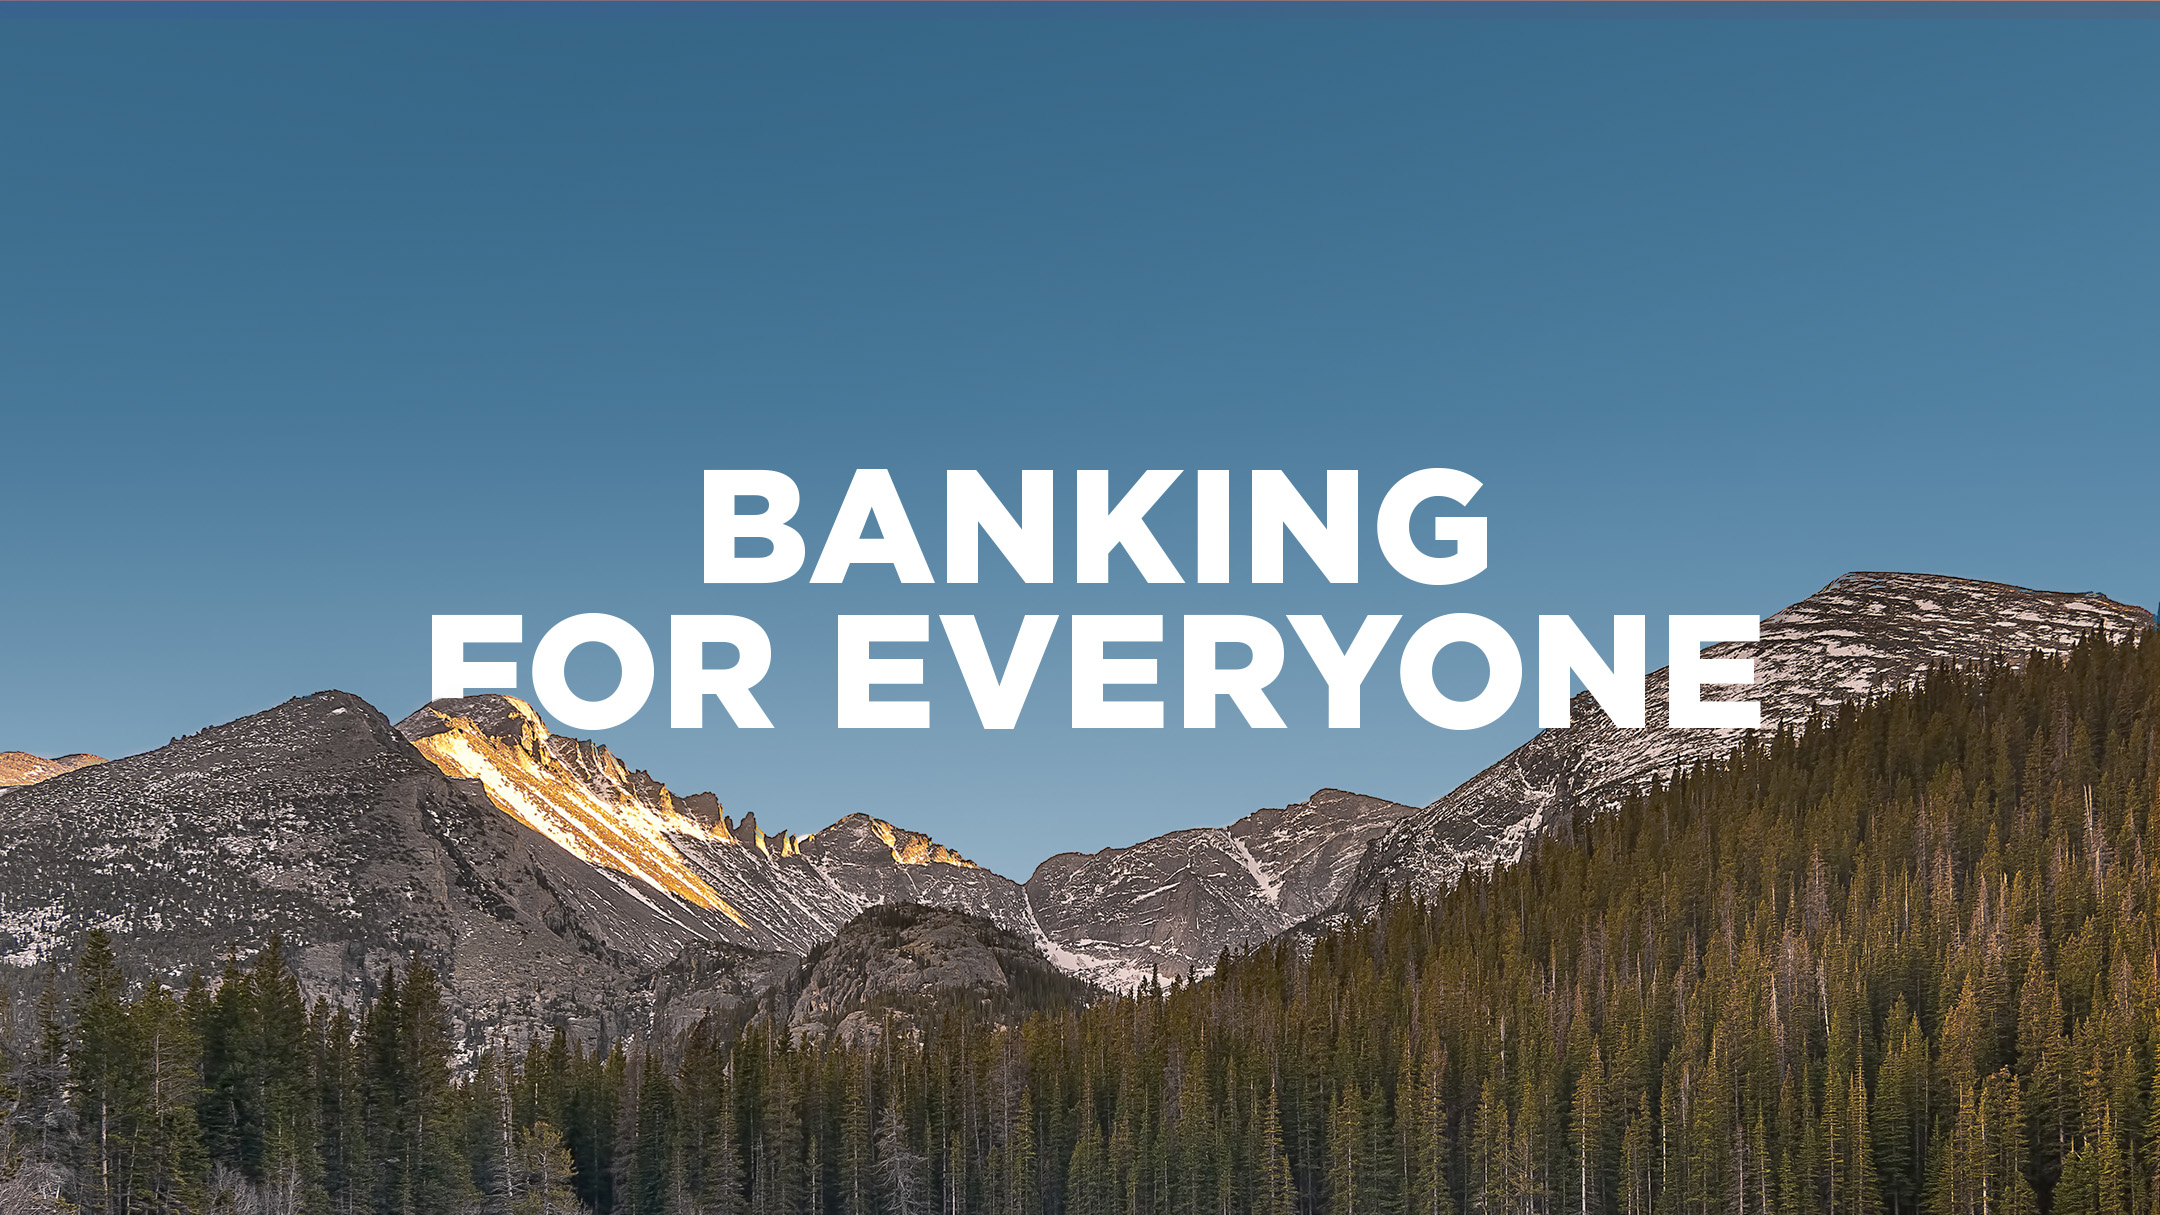 Banking for everyone.